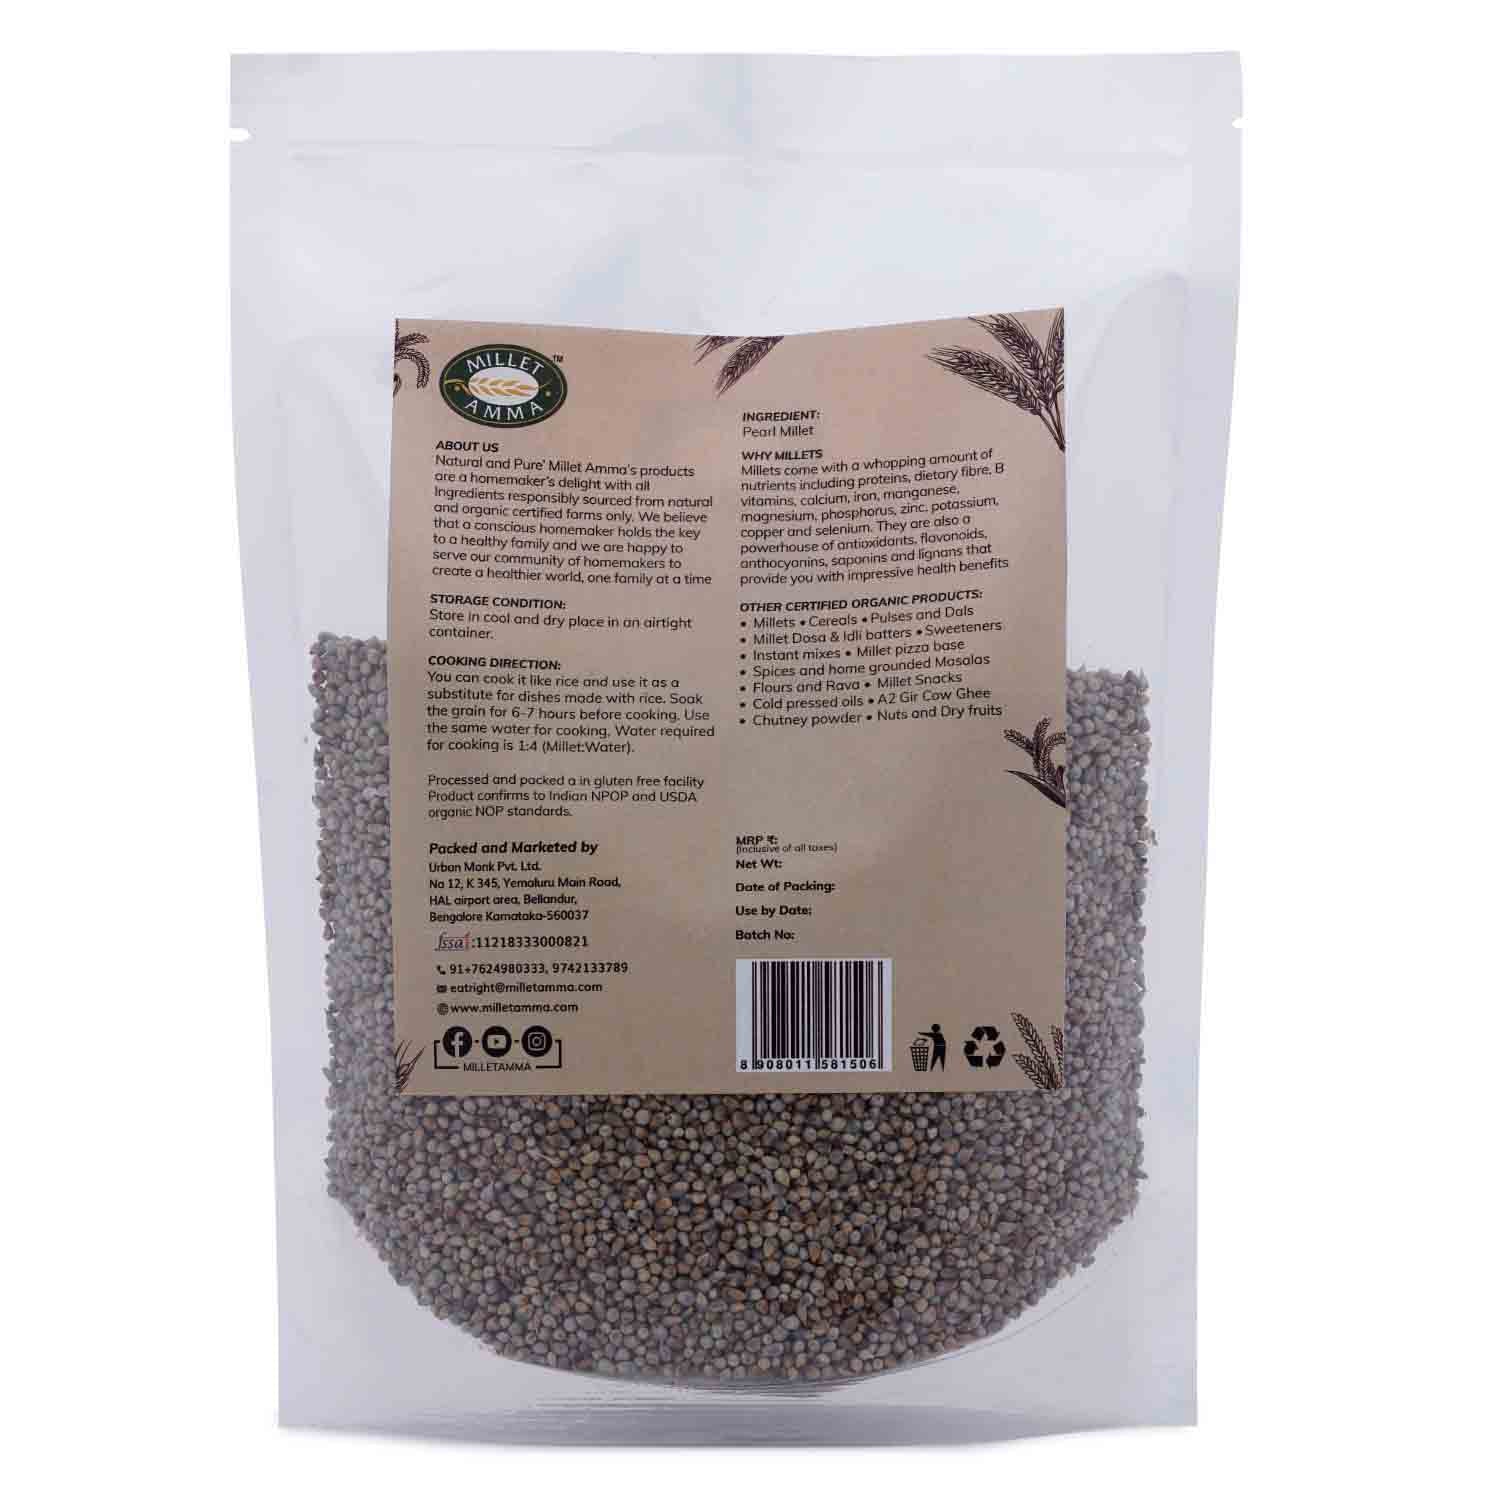 Millet Amma’s Organic Bajra Millet Grains- Millet Amma’s Organic Bajra(Pearl) Millet Grains are rich in magnesium which aids in better nervous function and energy production.  Unpolished Bajra Millets are a source of potassium and fiber. Potassium is one of the most important minerals required for the body.  You can make a variety of dishes with our Gluten-free Bajra Millet Grains like khichdi, idli, dosa, pancakes, cake and rotis.